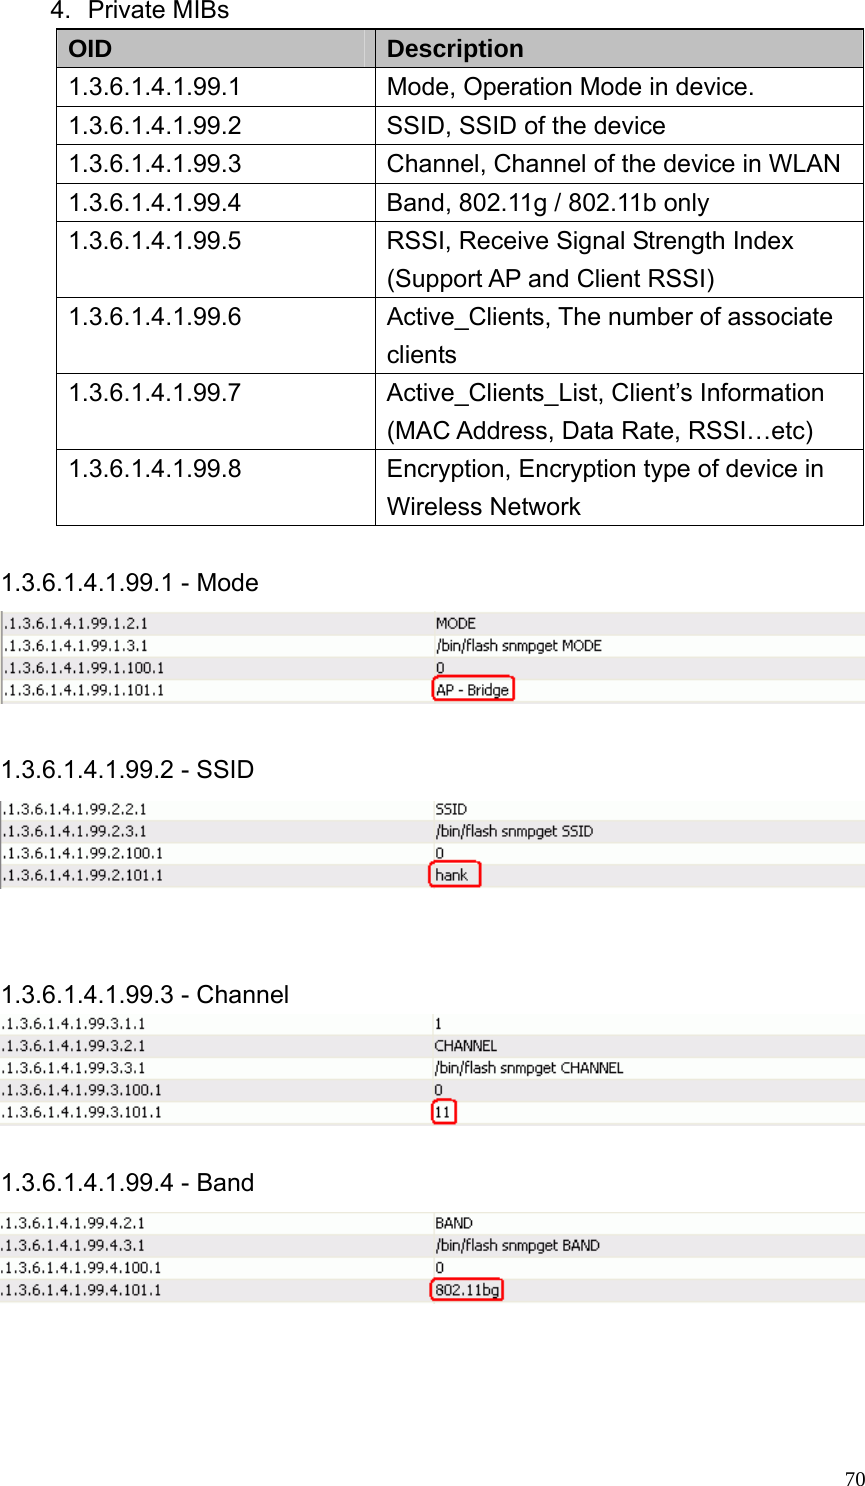  704. Private MIBs OID  Description 1.3.6.1.4.1.99.1 Mode, Operation Mode in device. 1.3.6.1.4.1.99.2 SSID, SSID of the device 1.3.6.1.4.1.99.3 Channel, Channel of the device in WLAN 1.3.6.1.4.1.99.4  Band, 802.11g / 802.11b only   1.3.6.1.4.1.99.5 RSSI, Receive Signal Strength Index (Support AP and Client RSSI) 1.3.6.1.4.1.99.6 Active_Clients, The number of associate clients  1.3.6.1.4.1.99.7 Active_Clients_List, Client’s Information (MAC Address, Data Rate, RSSI…etc) 1.3.6.1.4.1.99.8 Encryption, Encryption type of device in Wireless Network    1.3.6.1.4.1.99.1 - Mode   1.3.6.1.4.1.99.2 - SSID    1.3.6.1.4.1.99.3 - Channel   1.3.6.1.4.1.99.4 - Band     